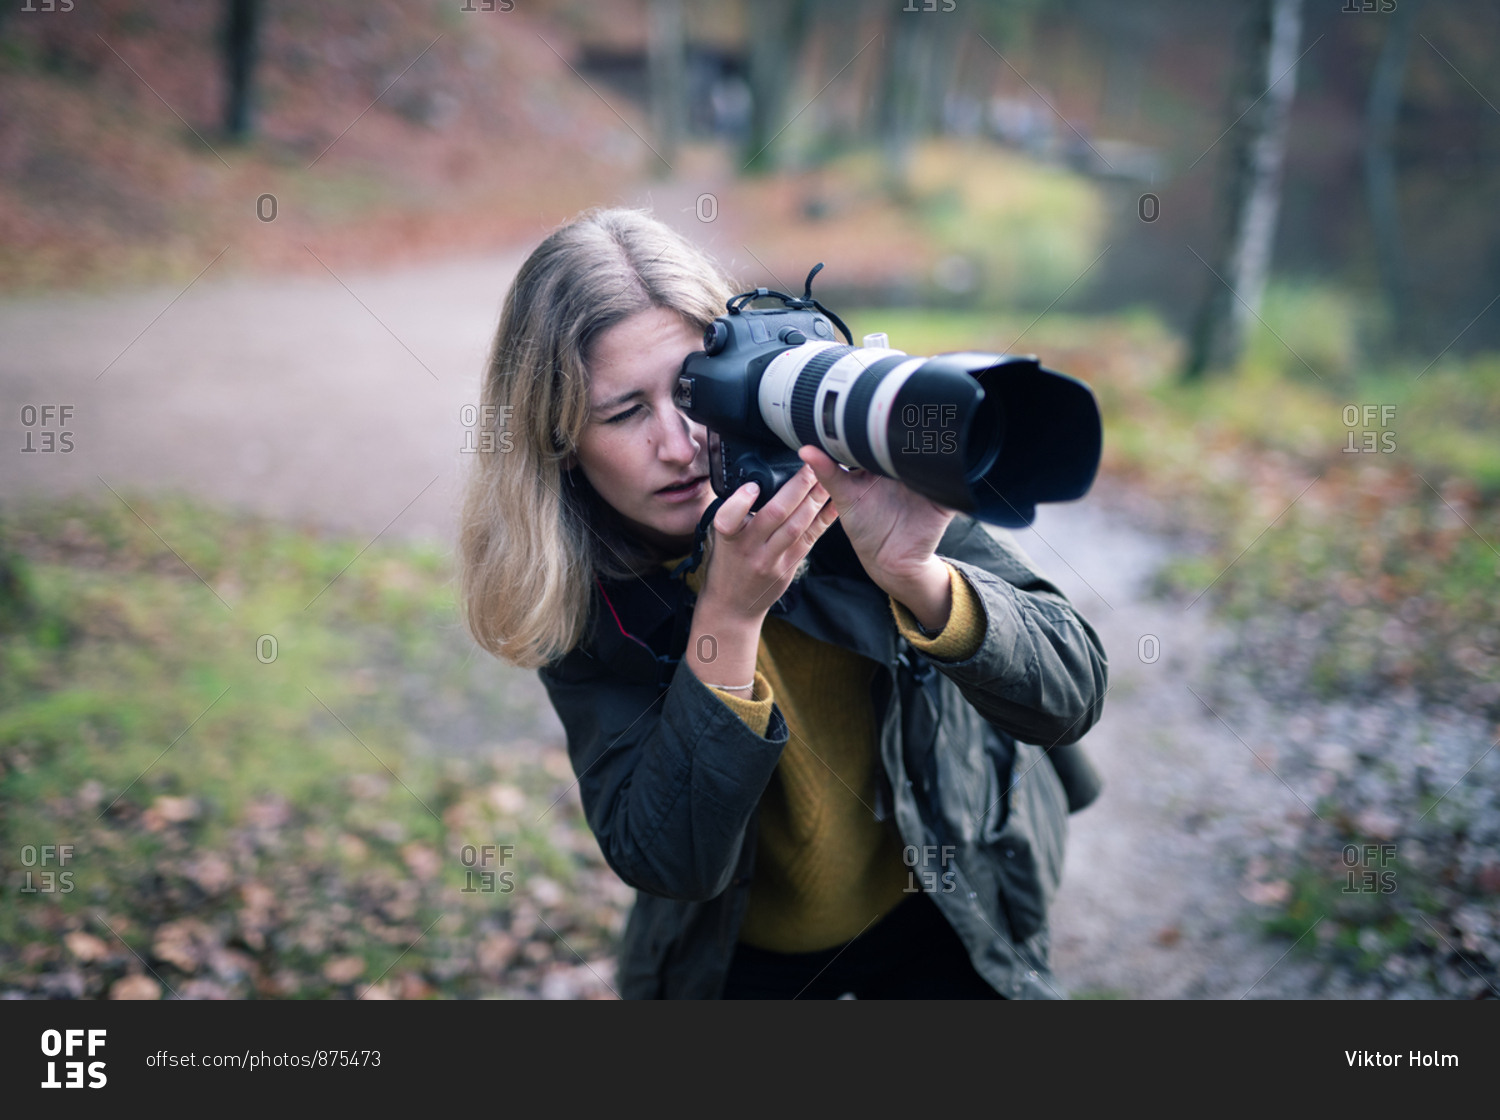 Blonde photographer using camera with large telephoto lens while taking shots in nature